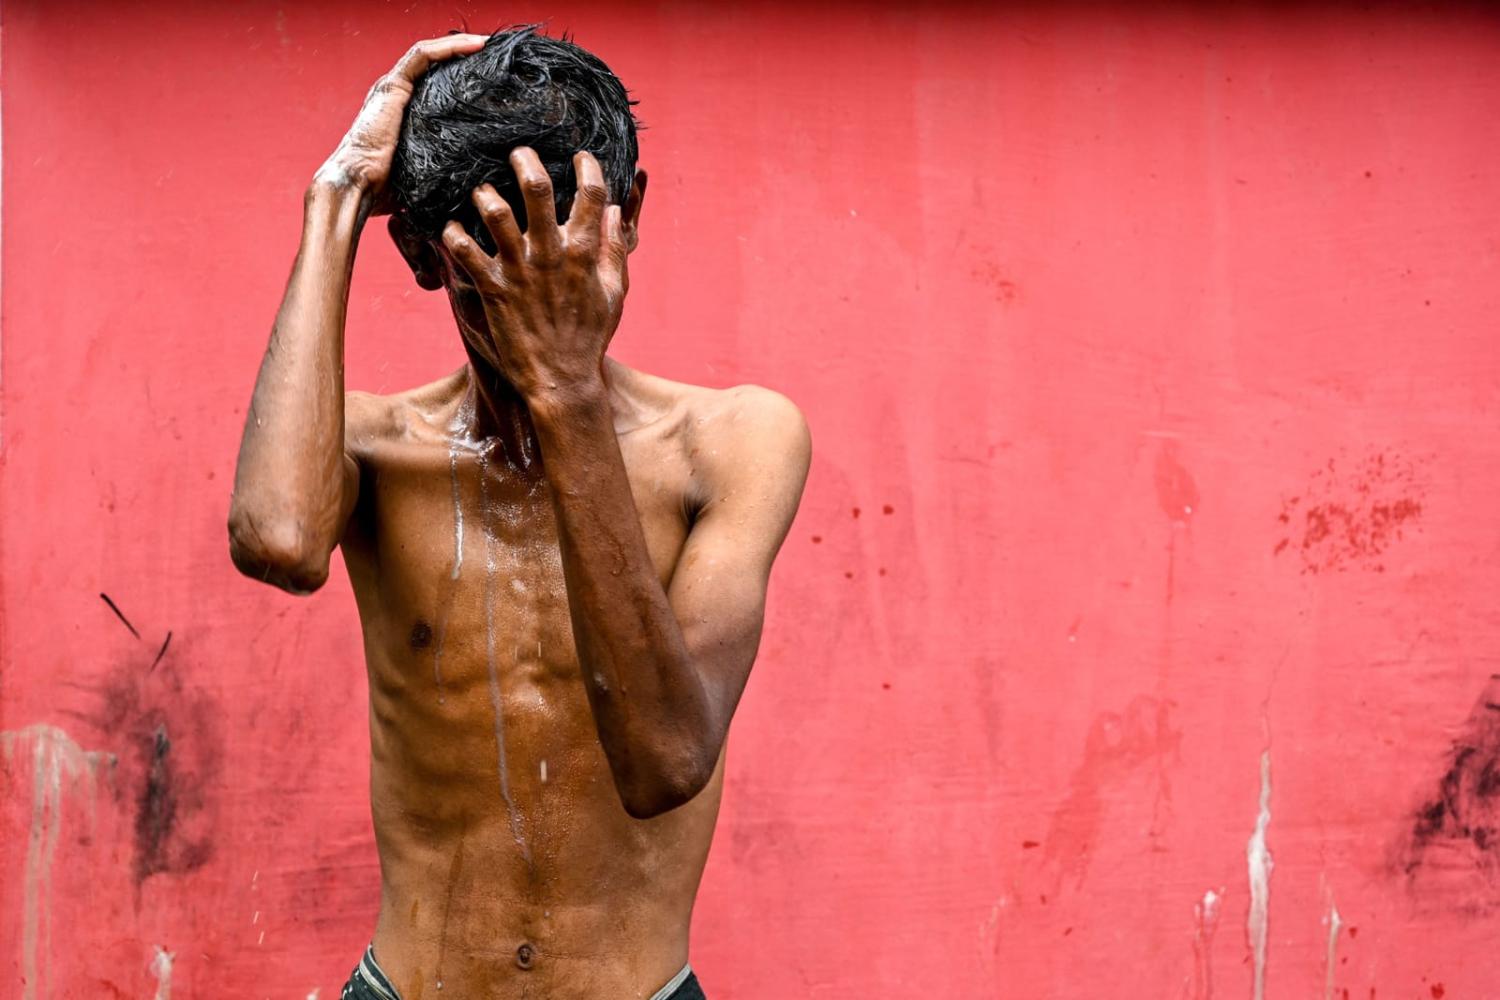 A Rohingya refugee bathes at a temporary shelter after arriving by boat in Laweueng, Aceh province, Indonesia, on 27 December (Chaideer Mahyuddin/AFP via Getty Images)